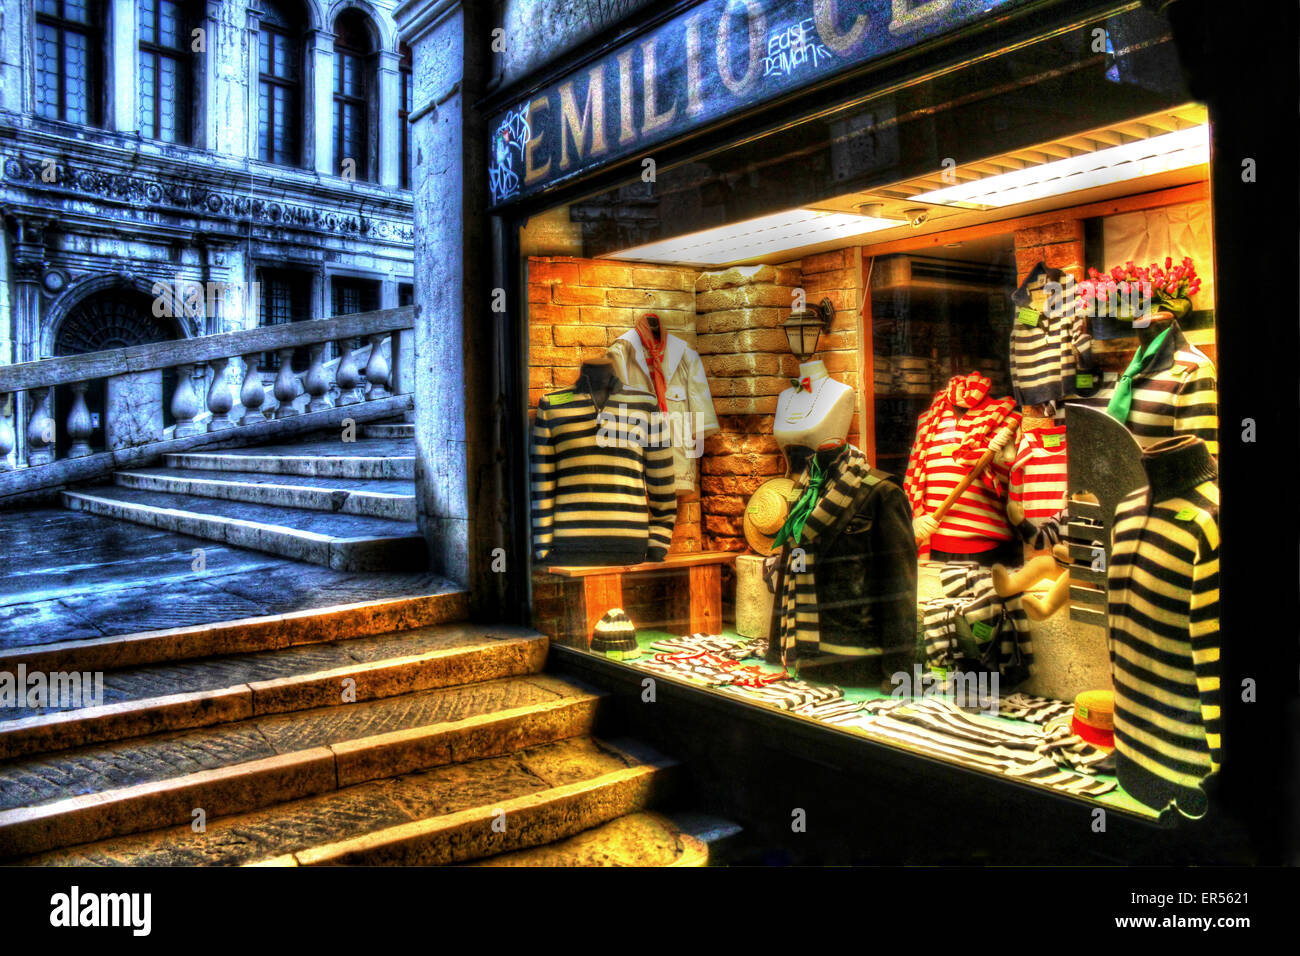 Emilio Ceccato. Historic and traditional shop for all Gondoliers to buy uniform. Stock Photo